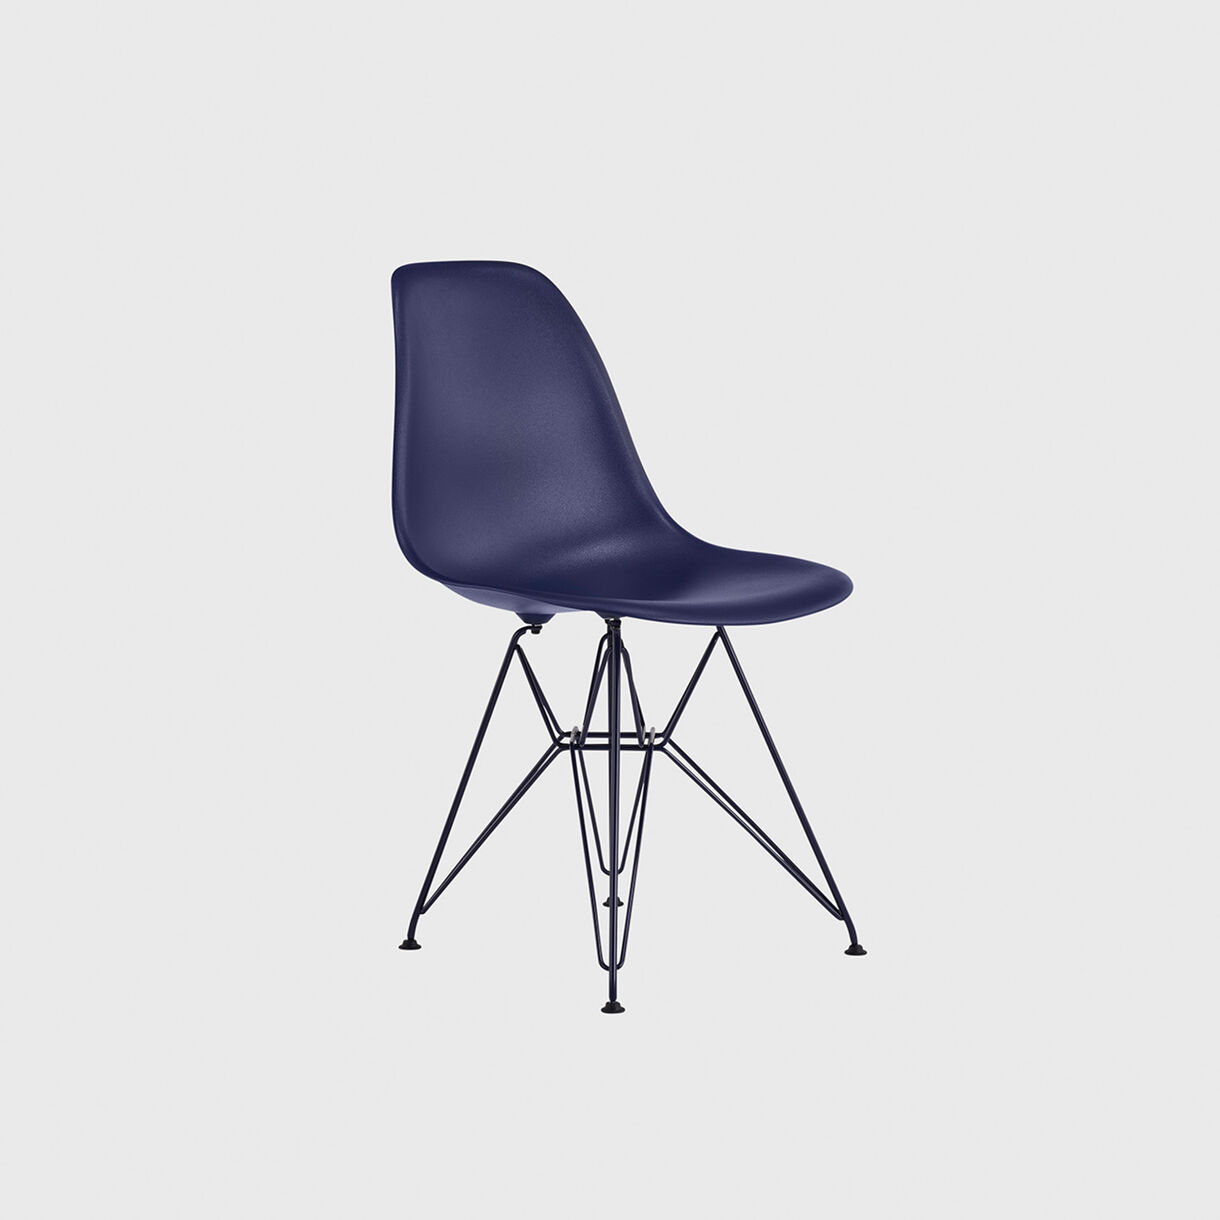 HM x Hay Eames Moulded Plastic Side Chair, Wire Base, Black Blue